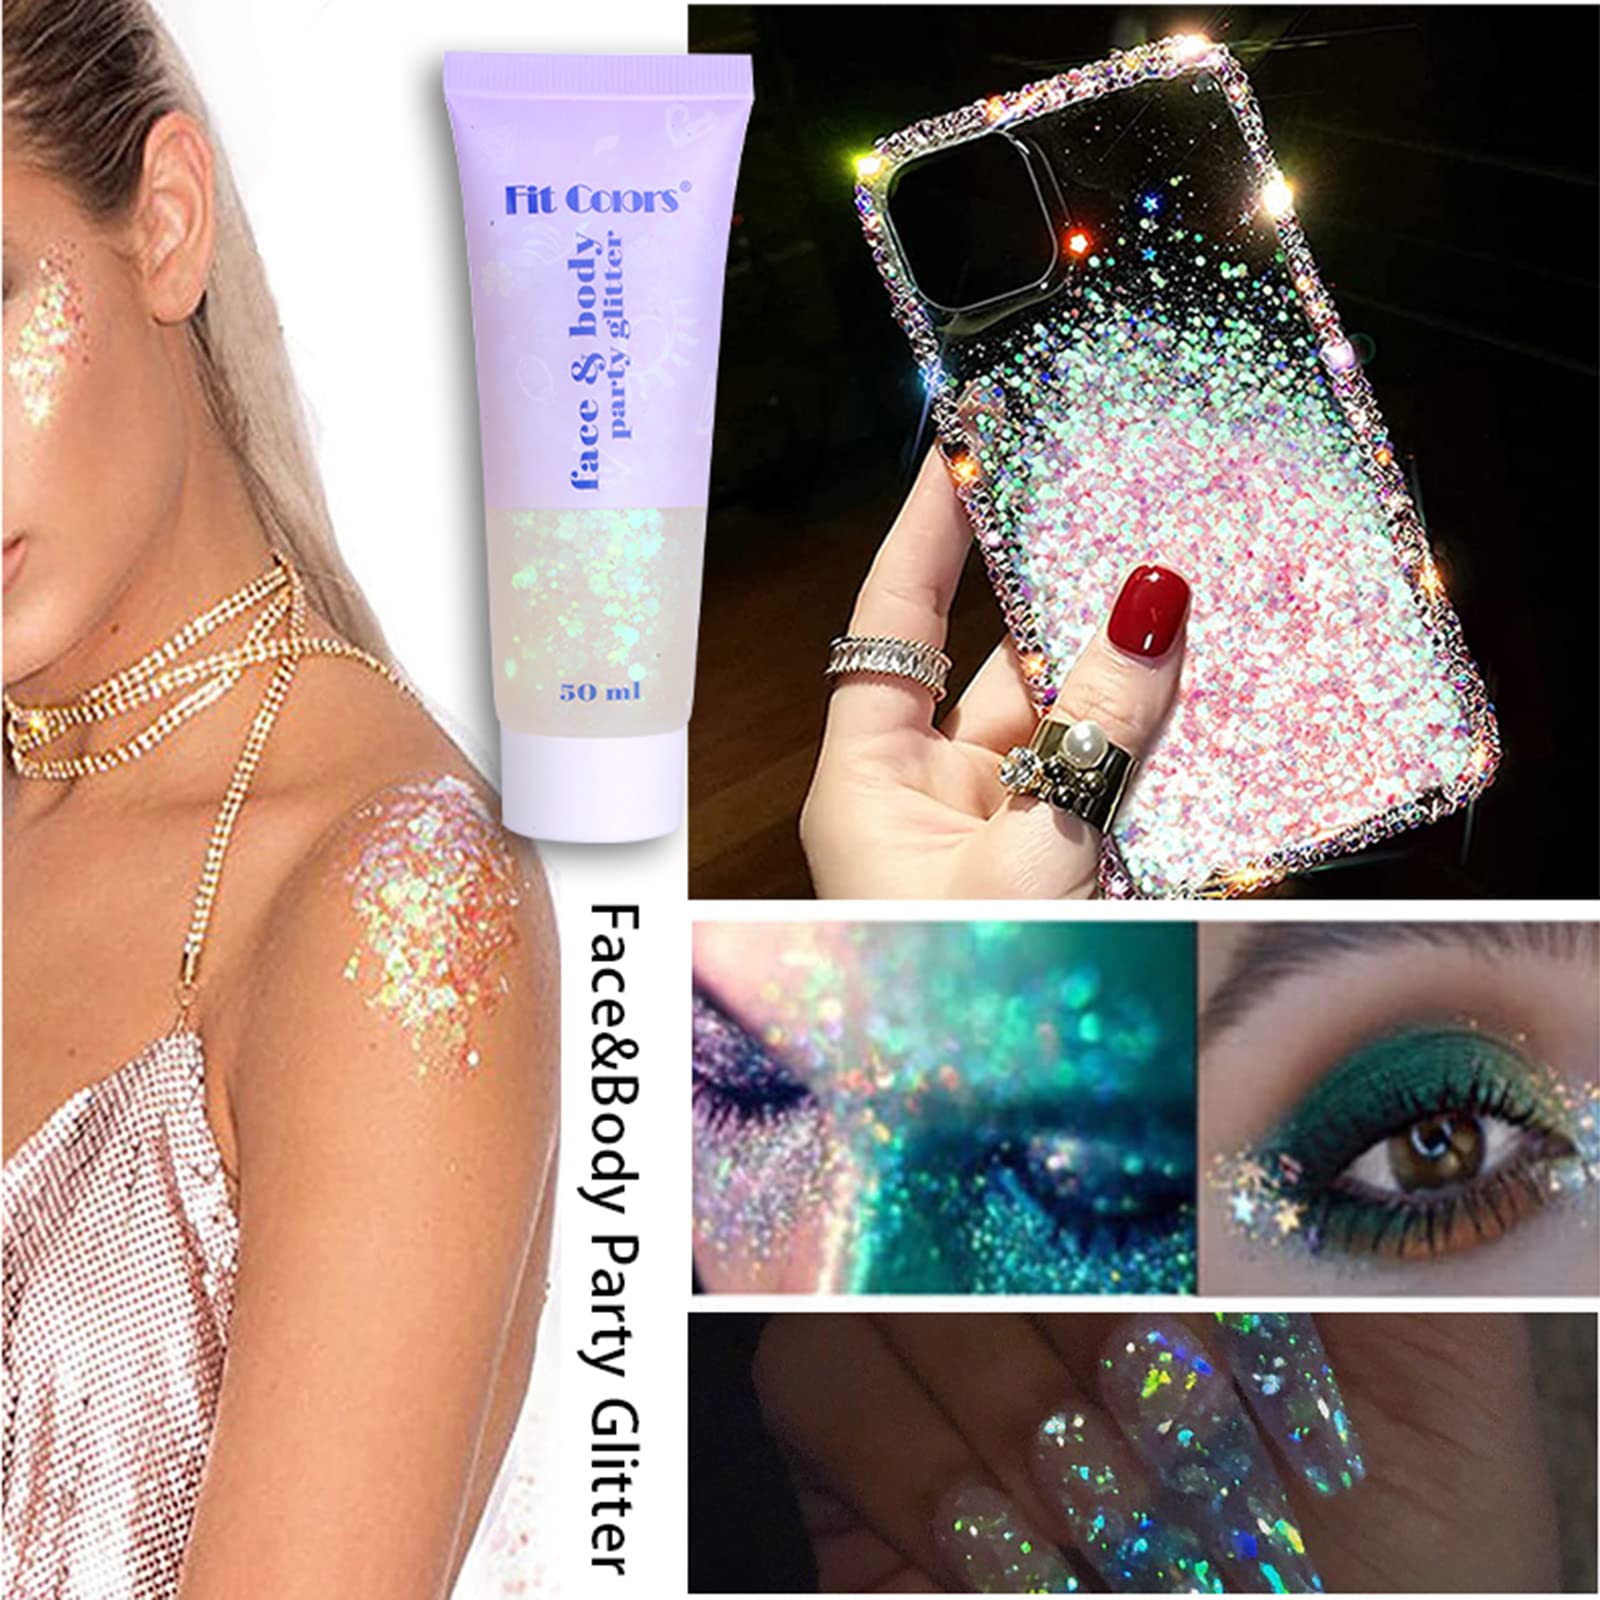 Glow in The Dark Body Glitter Gel, Holographic Chunky Glitter Makeup for Body, Hair, Face, Nail, Super Long Lasting Waterproof Luminous Face Glitter Gel for Carnival Party（#8 Luminous Glitter,1PC）